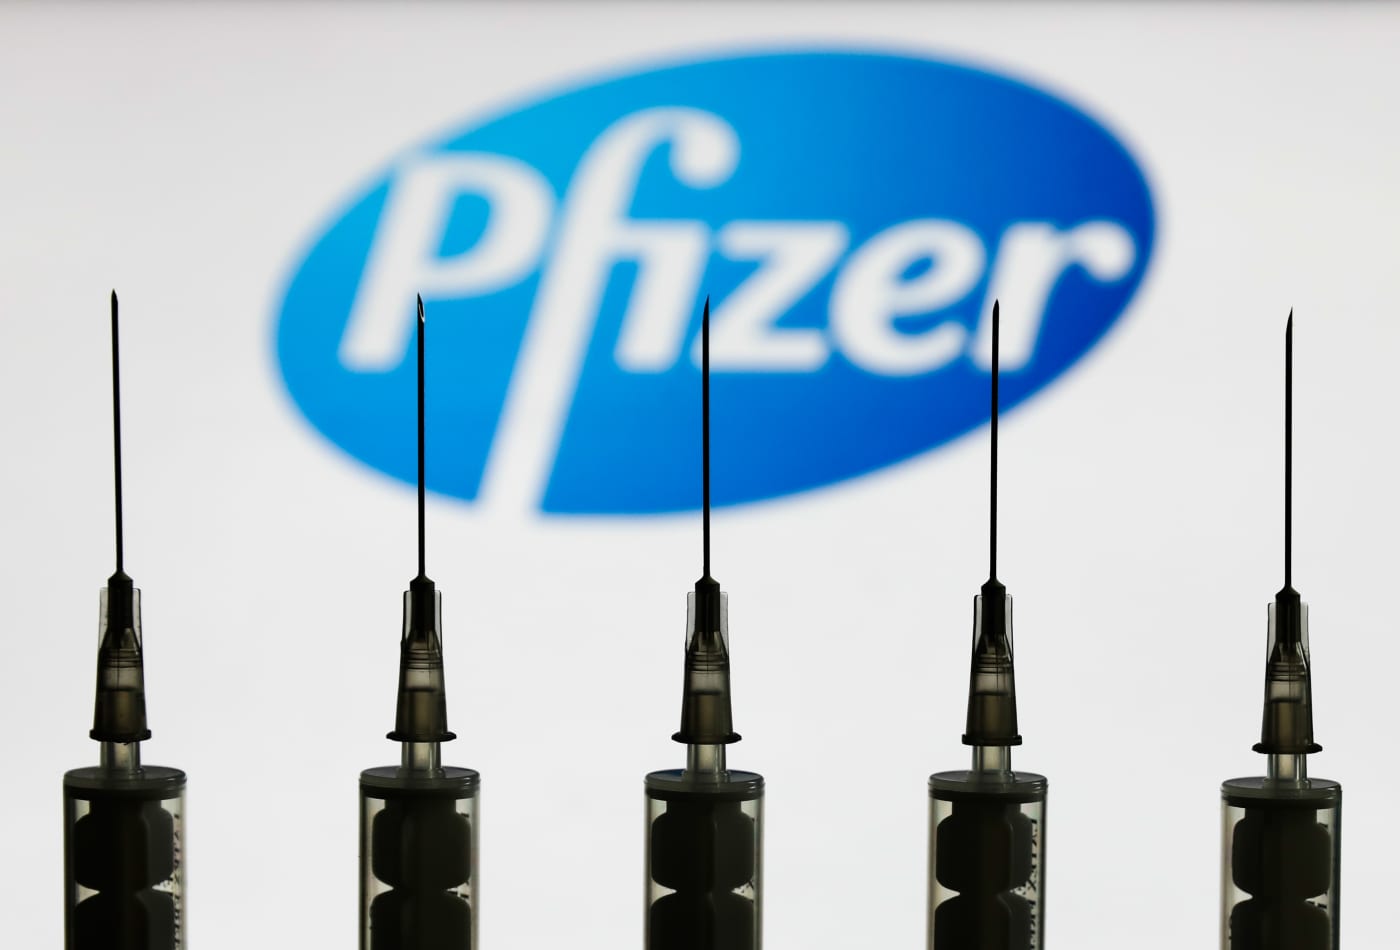 Under the Pfizer-BioNtech deal, the 27 EU countries could buy 200 million doses, and have an option to purchase another 100 million.